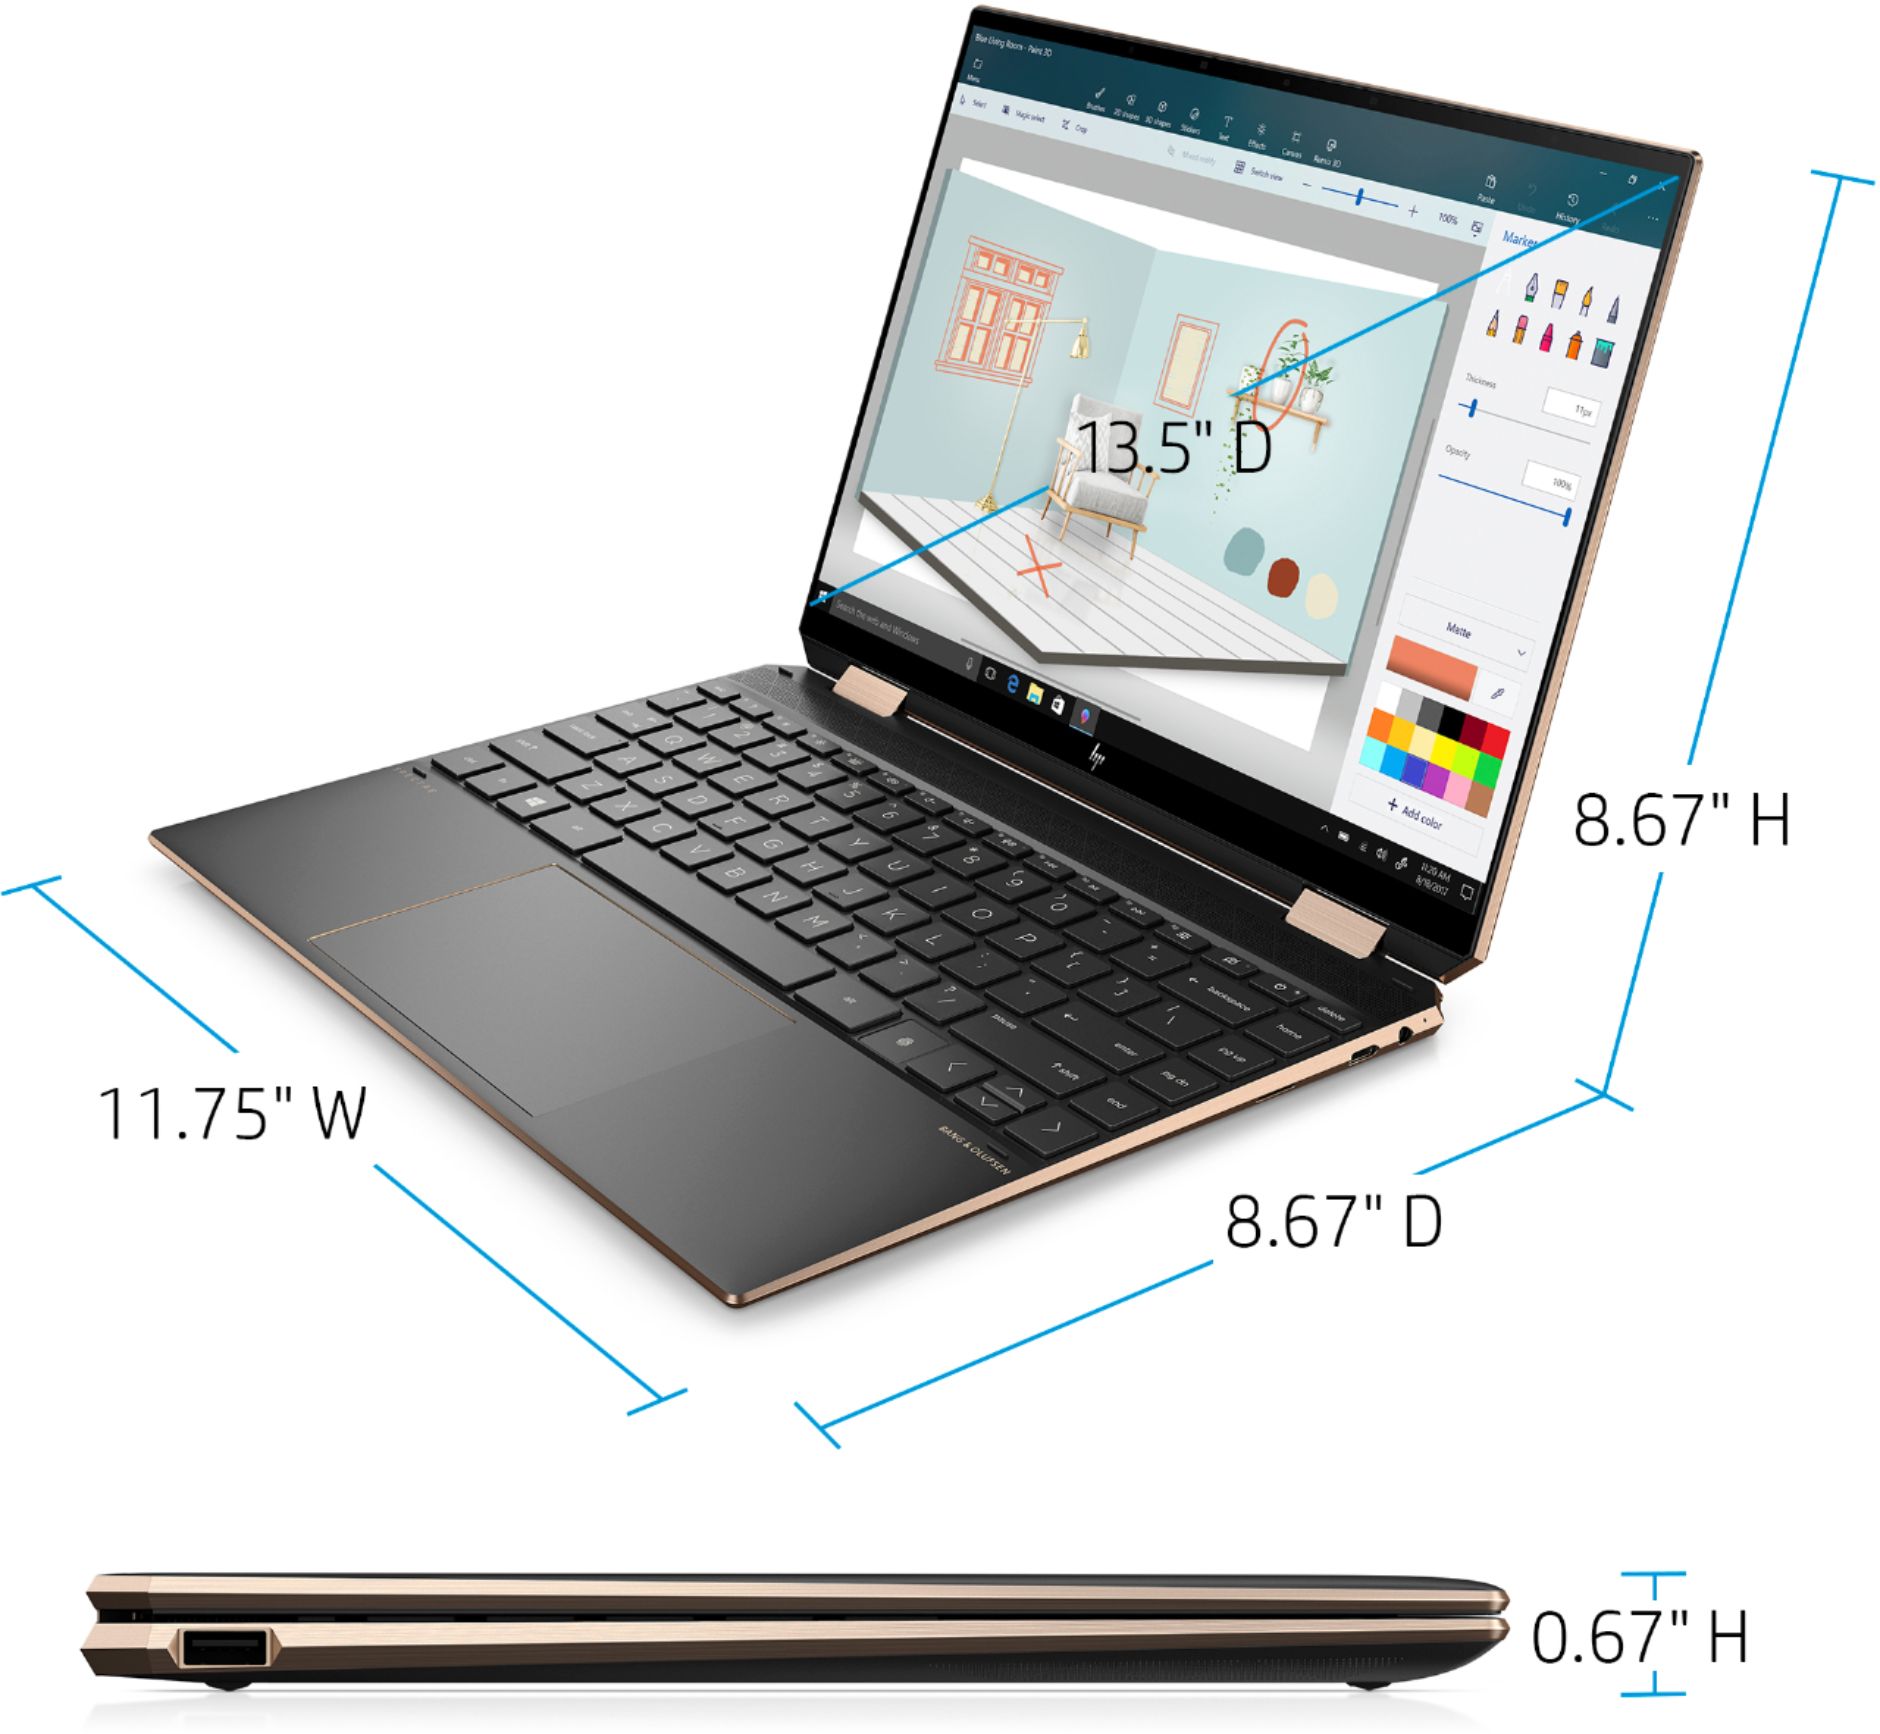 HP Spectre x360 13.5 inch 2-in-1 Laptop PC 14-ef0000 series specifications